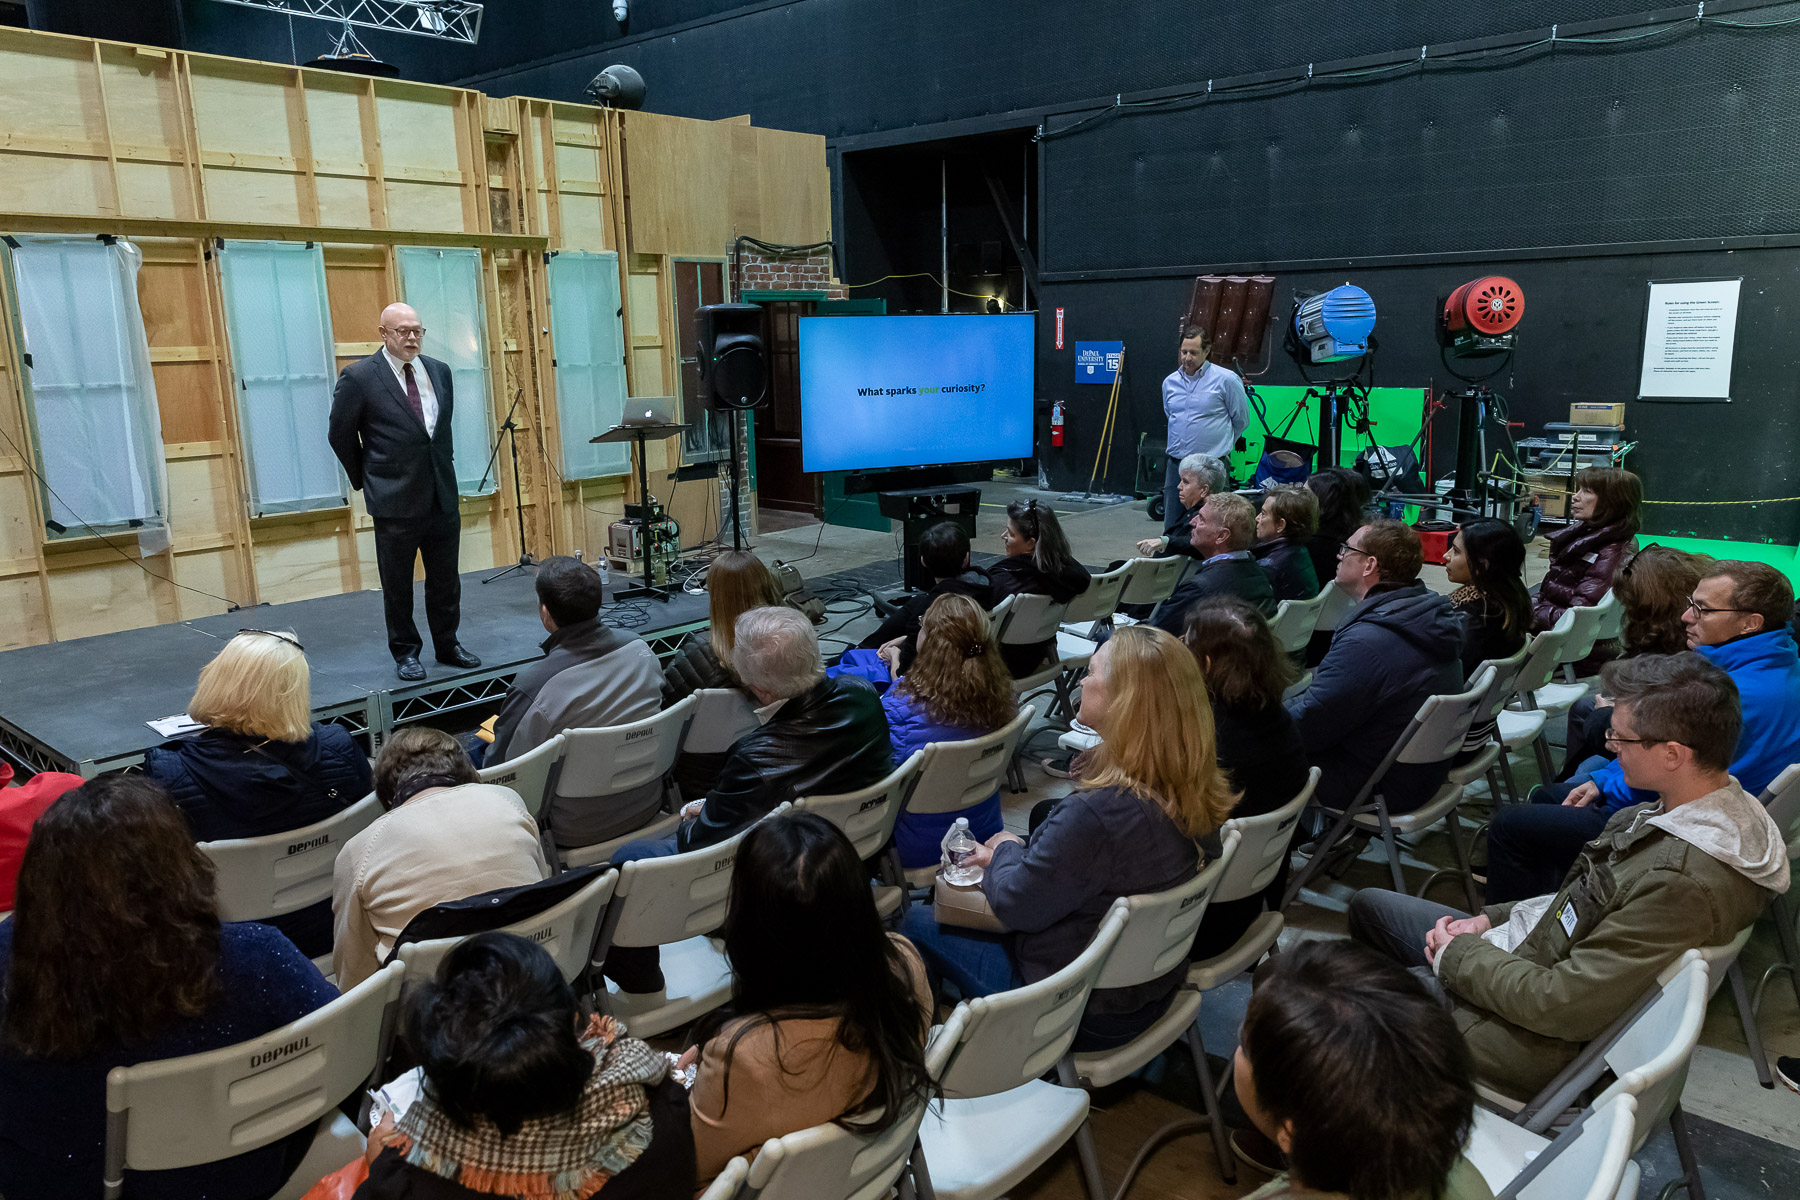 David Miller, dean of the College of Computing and Digital Media, speaks during the Chicago Ideas Week Lab: Behind the Scenes at Cinespace with DePaul University, Monday, Oct. 14, 2019, at Cinespace Chicago Film Studios on Chicago’s West Side. (DePaul University/Jeff Carrion)